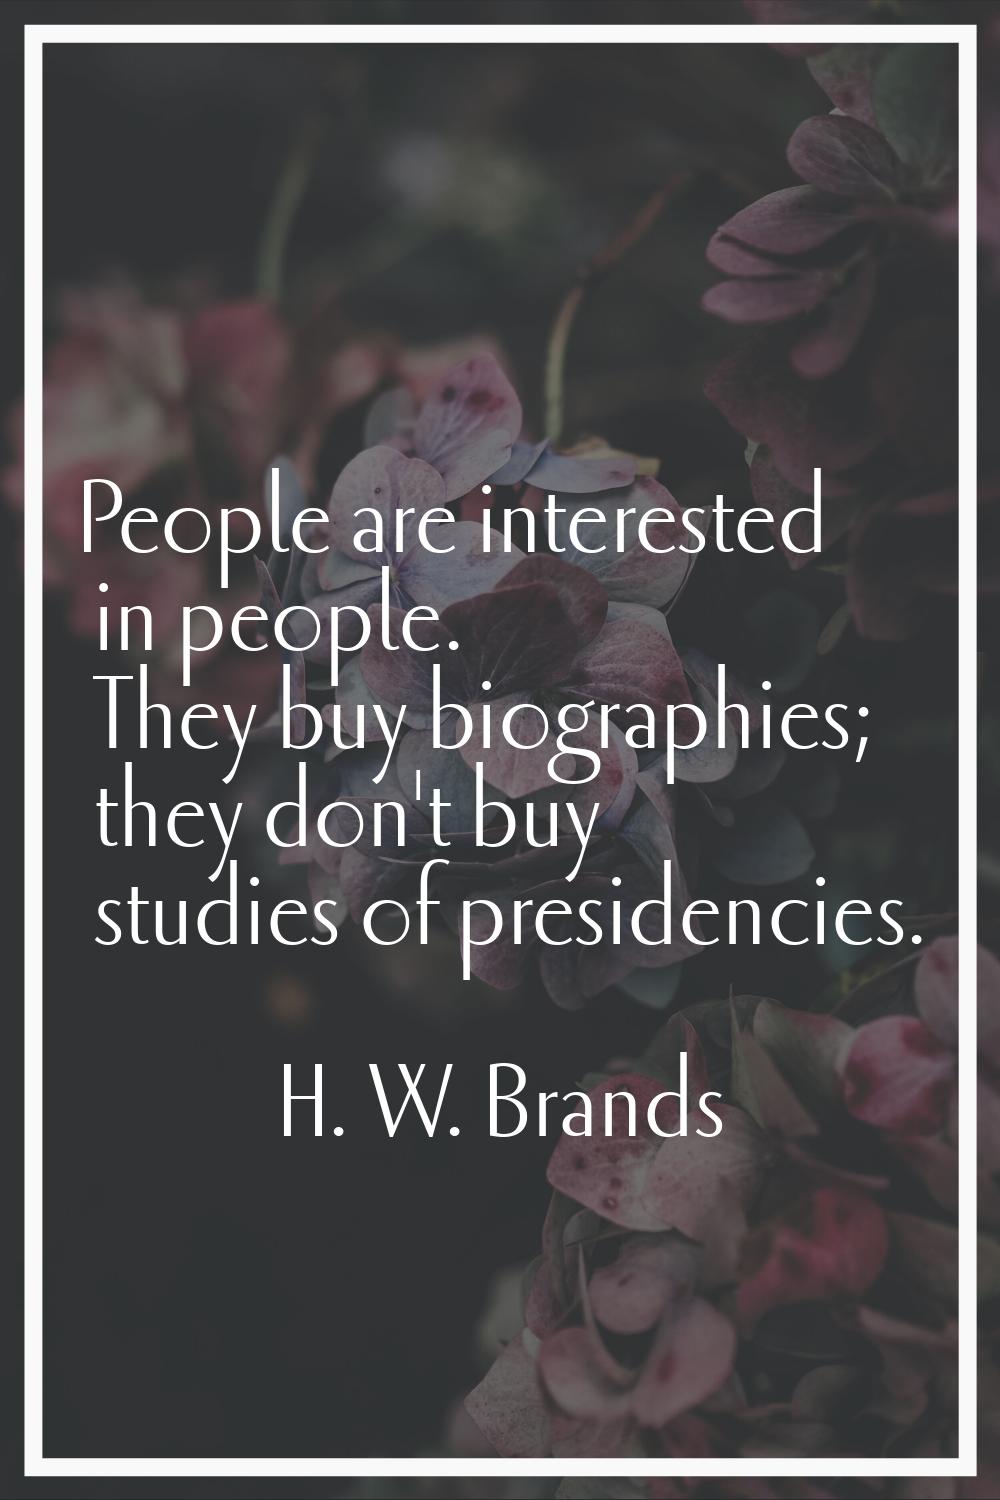 People are interested in people. They buy biographies; they don't buy studies of presidencies.